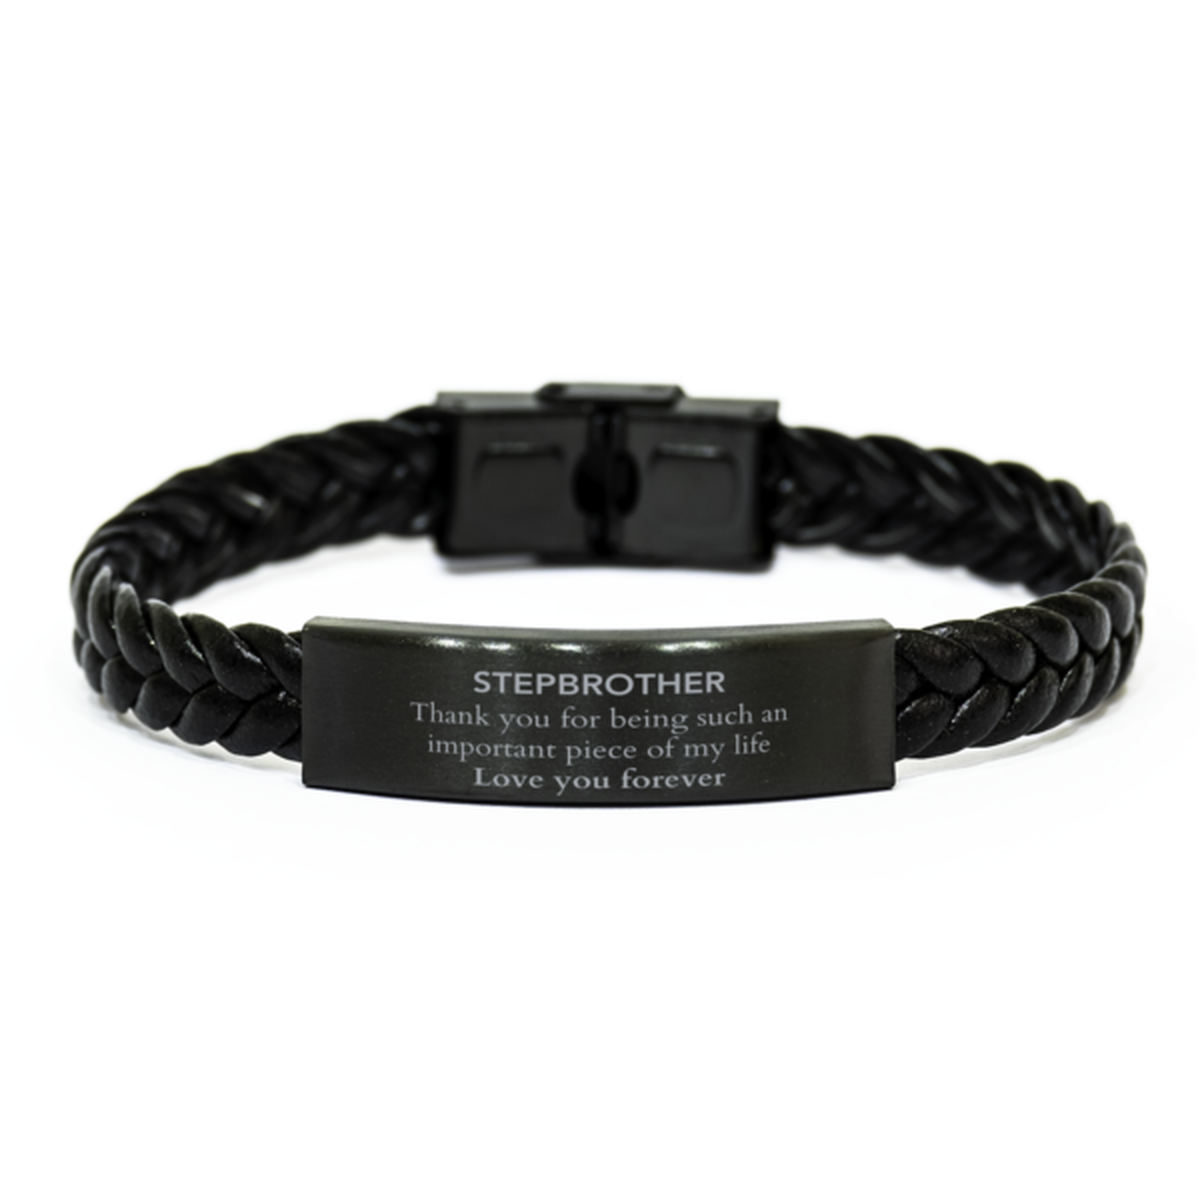 Appropriate Stepbrother Braided Leather Bracelet Epic Birthday Gifts for Stepbrother Thank you for being such an important piece of my life Stepbrother Christmas Mothers Fathers Day